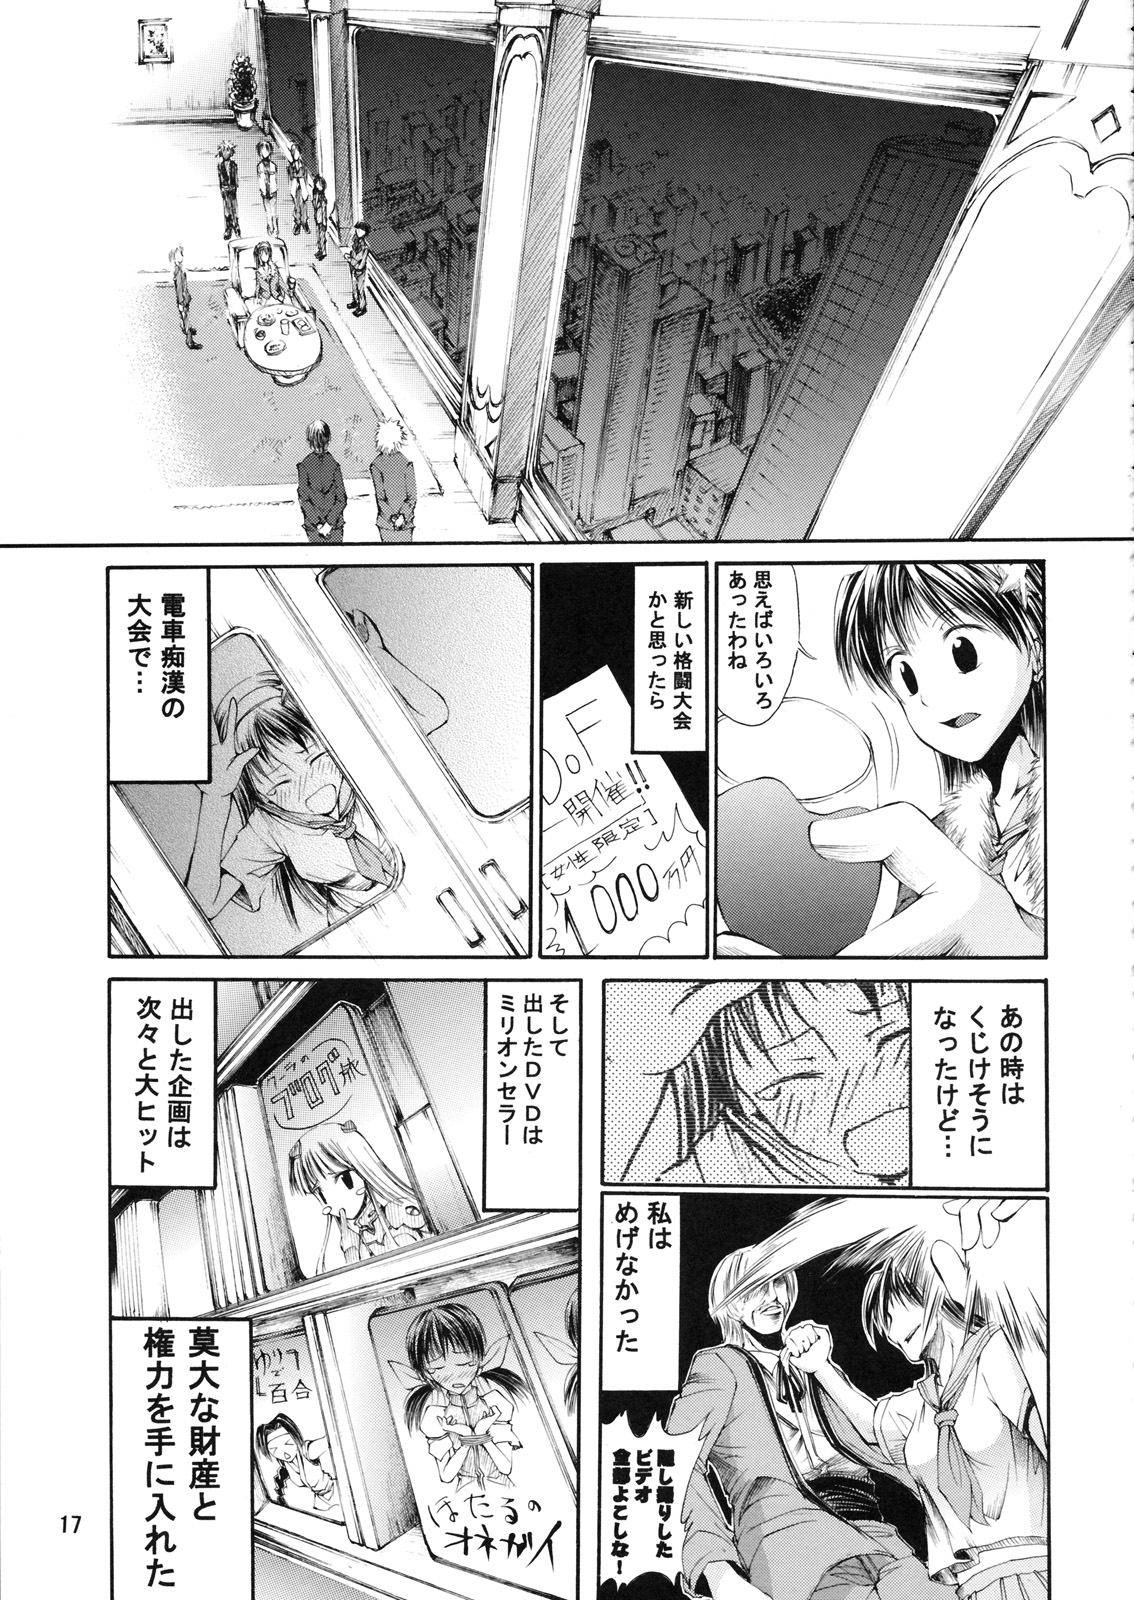 [3g (Junkie)] DOF Mai (King of Fighters) page 16 full